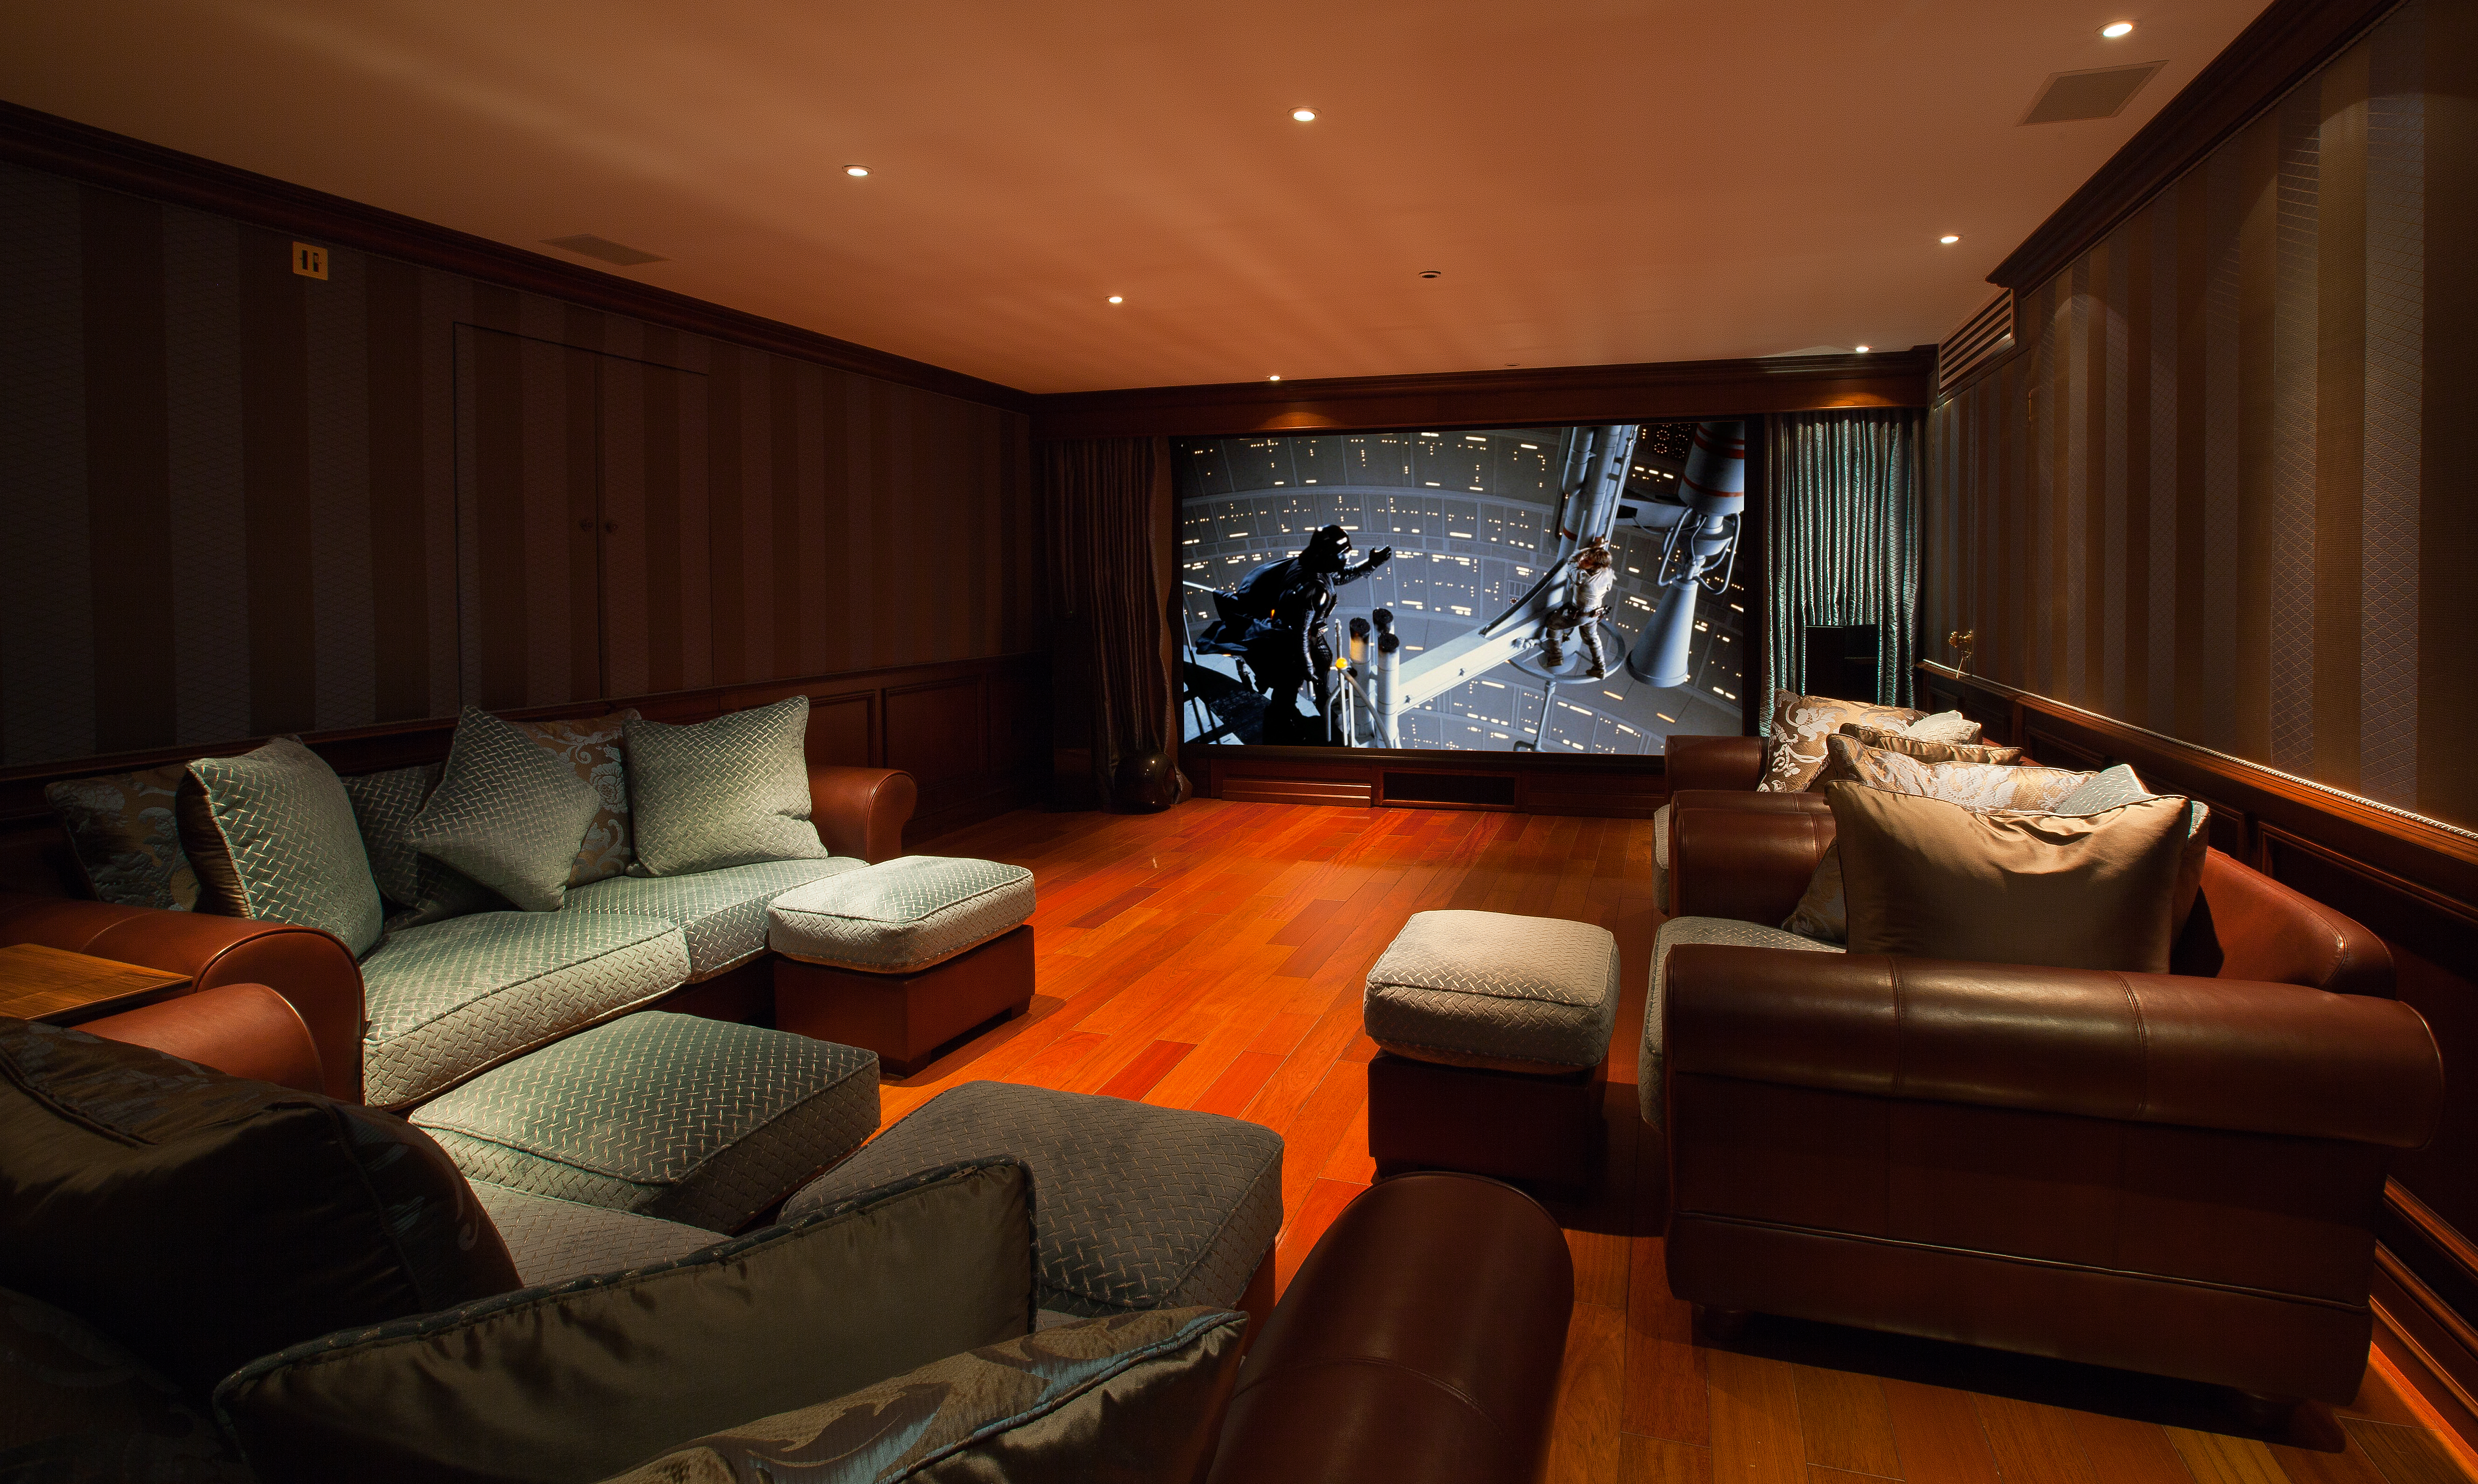 Home cinema, showing large screen with projected image of a Star Wars scene.